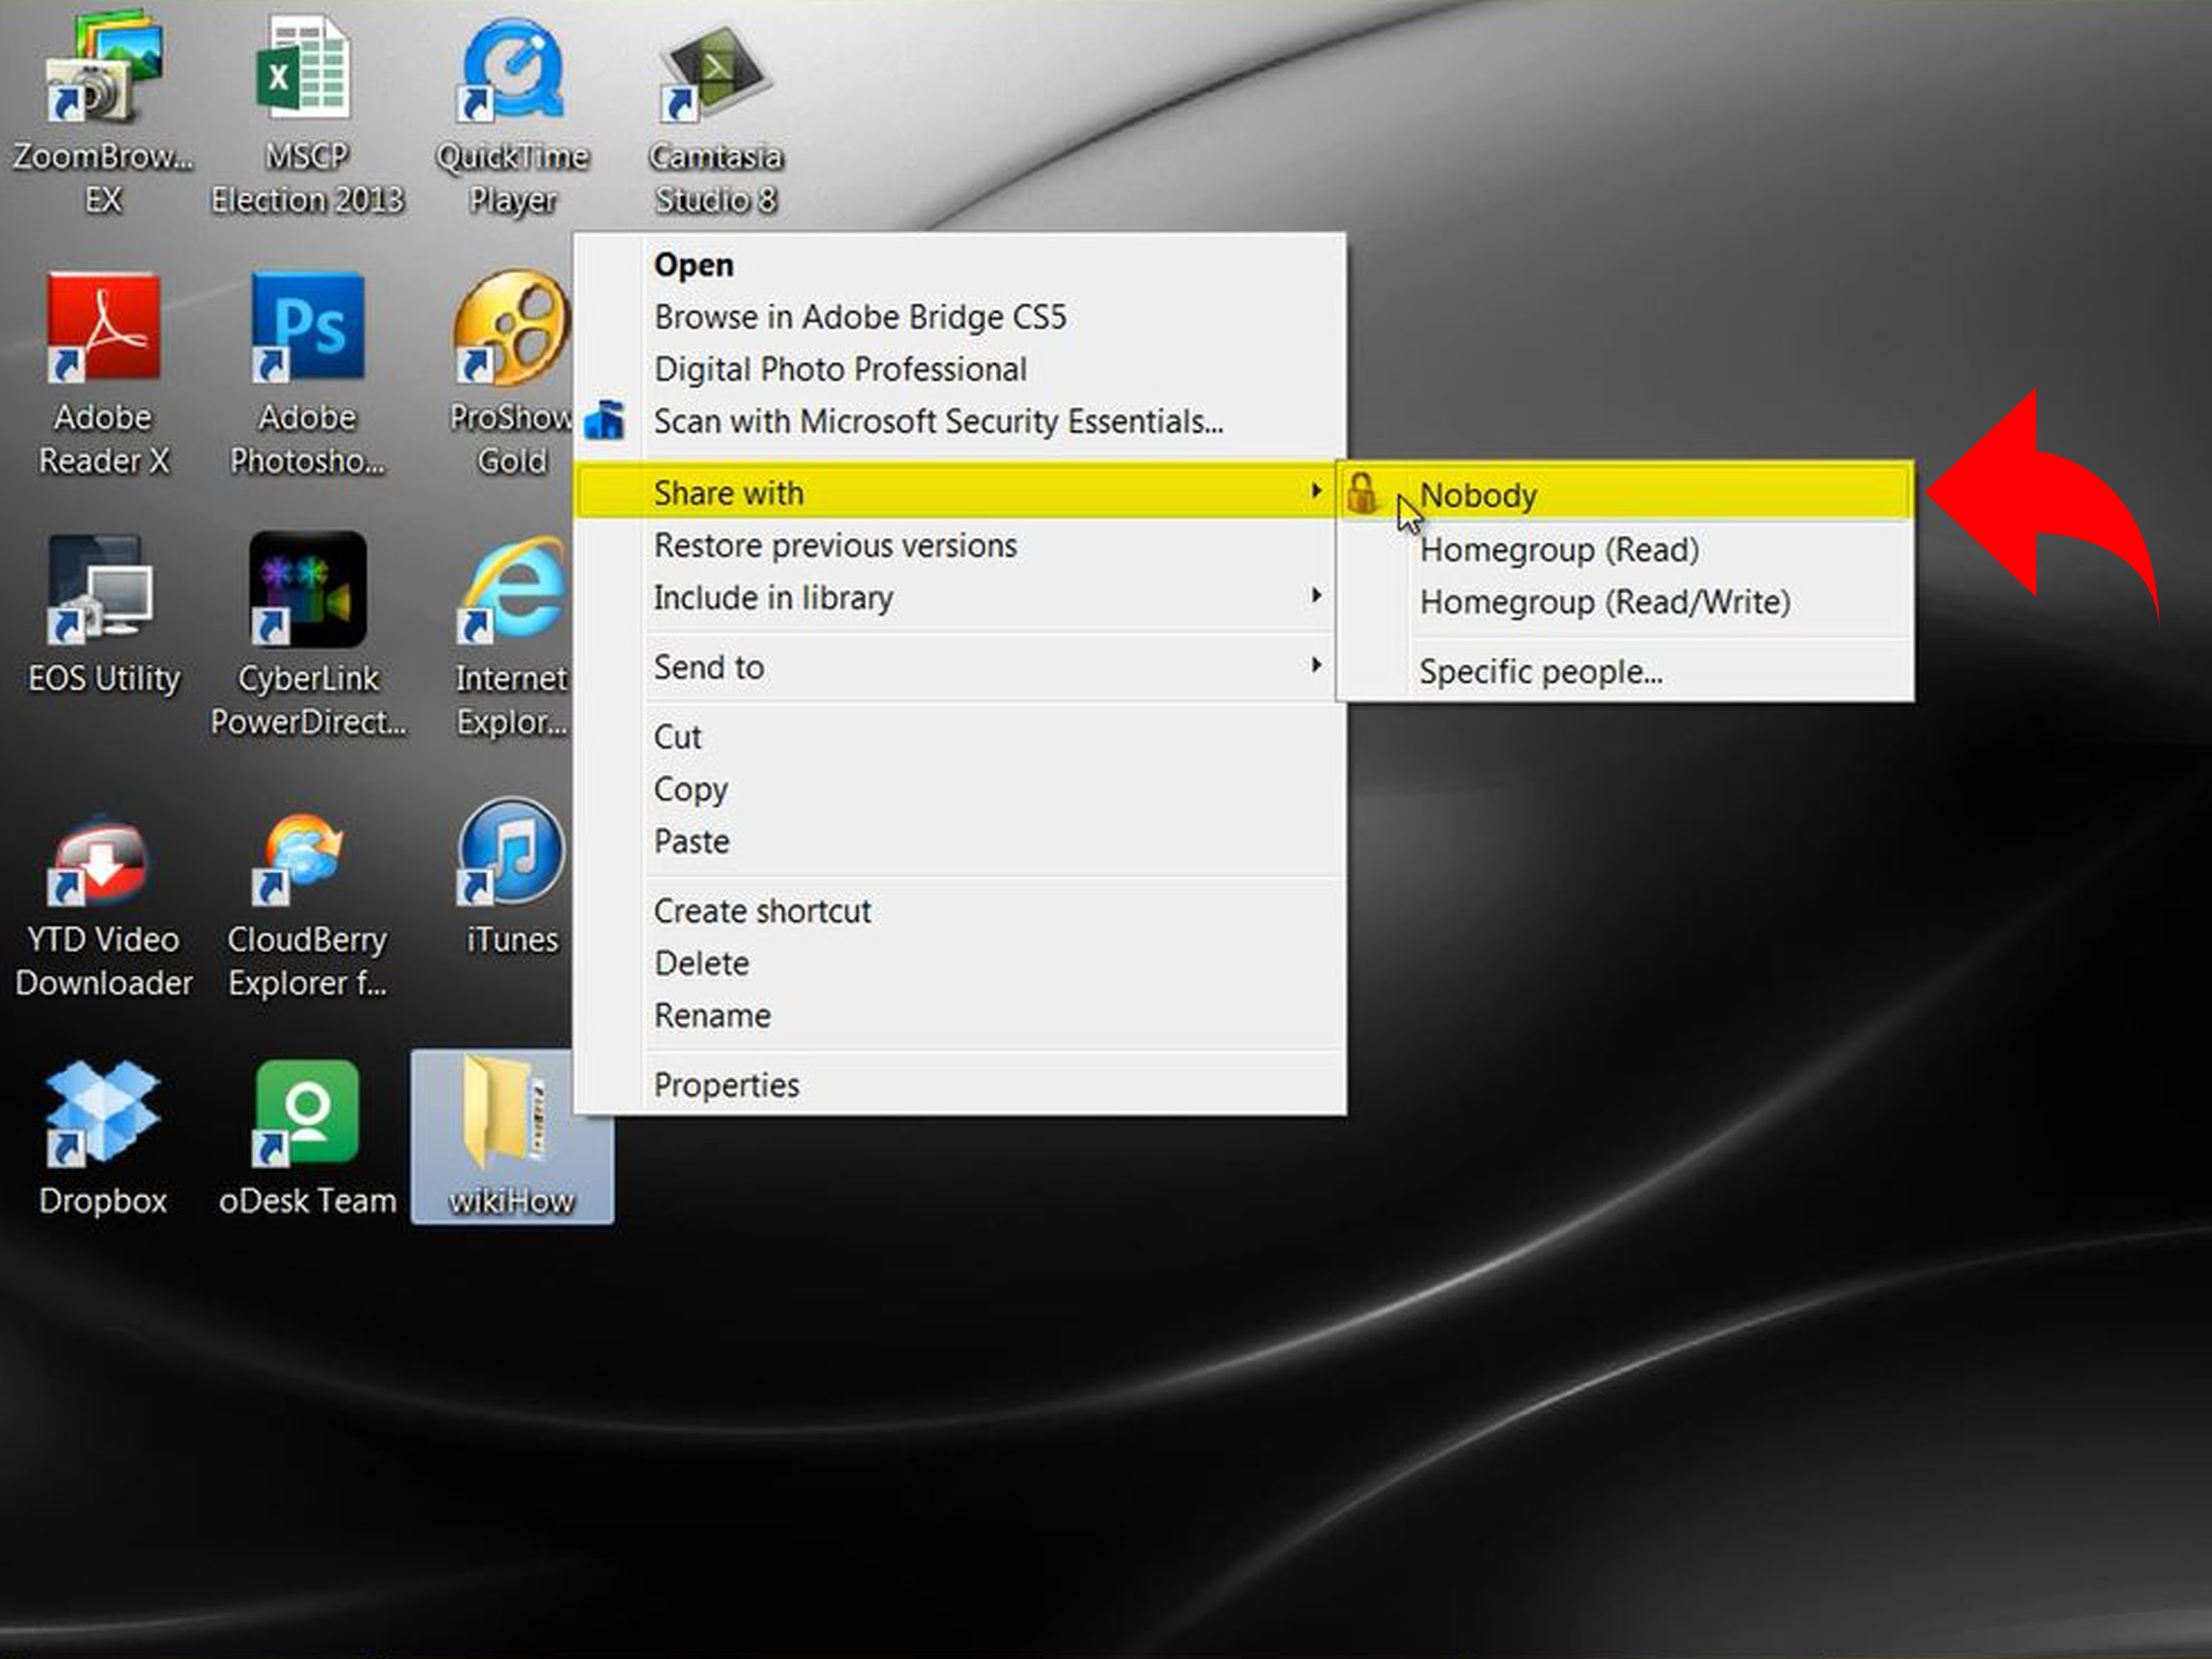 How to Add a Shared Folder in Windows 7 - 5 Easy Steps